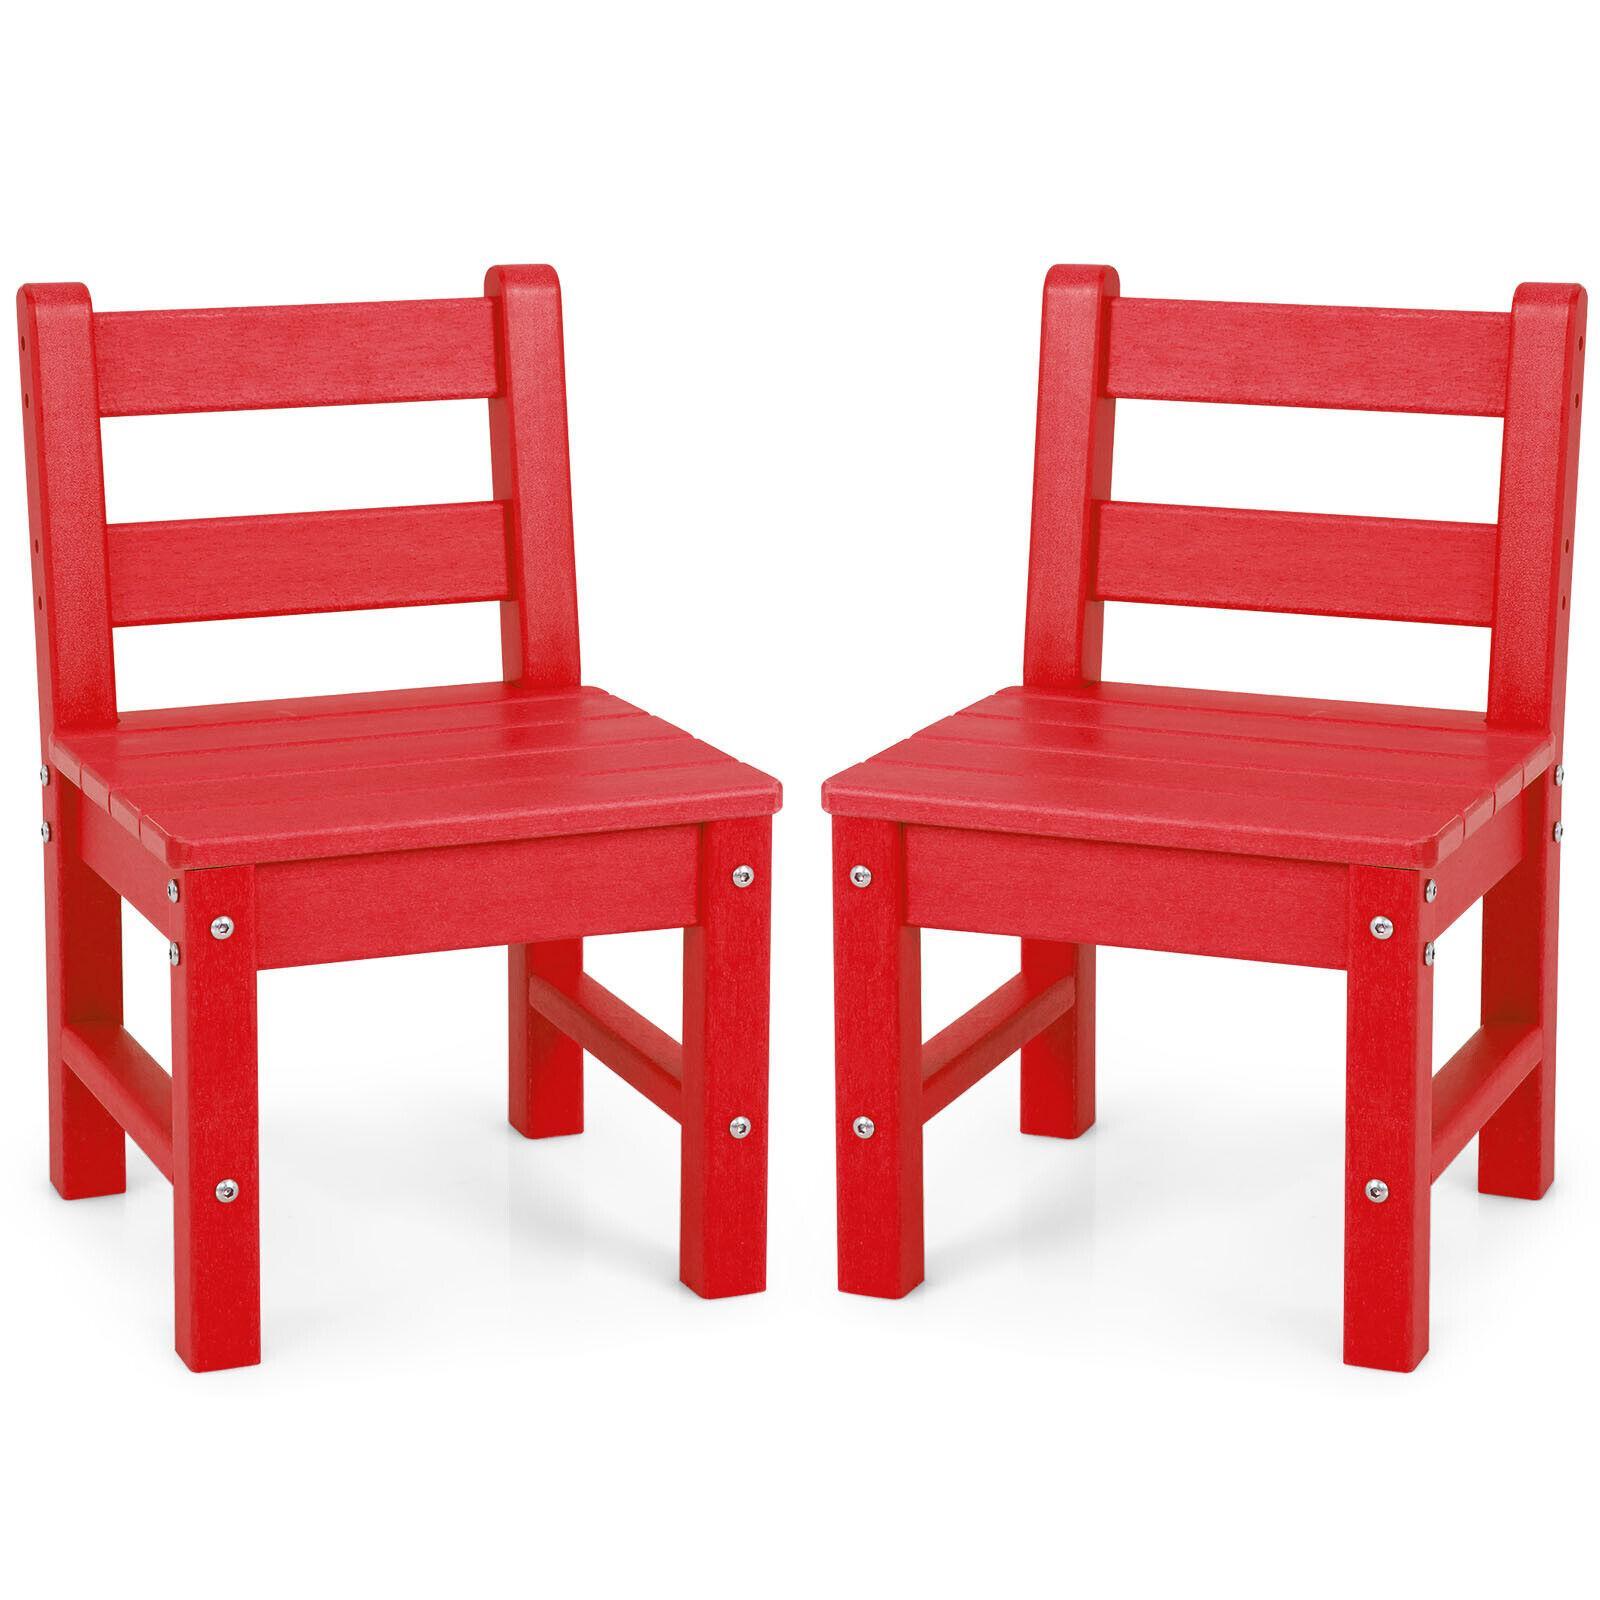 Giantex 2PCs Kids Chairs Toddler Activity Play Study Chairs Children Furniture Outdoor & Indoor Red